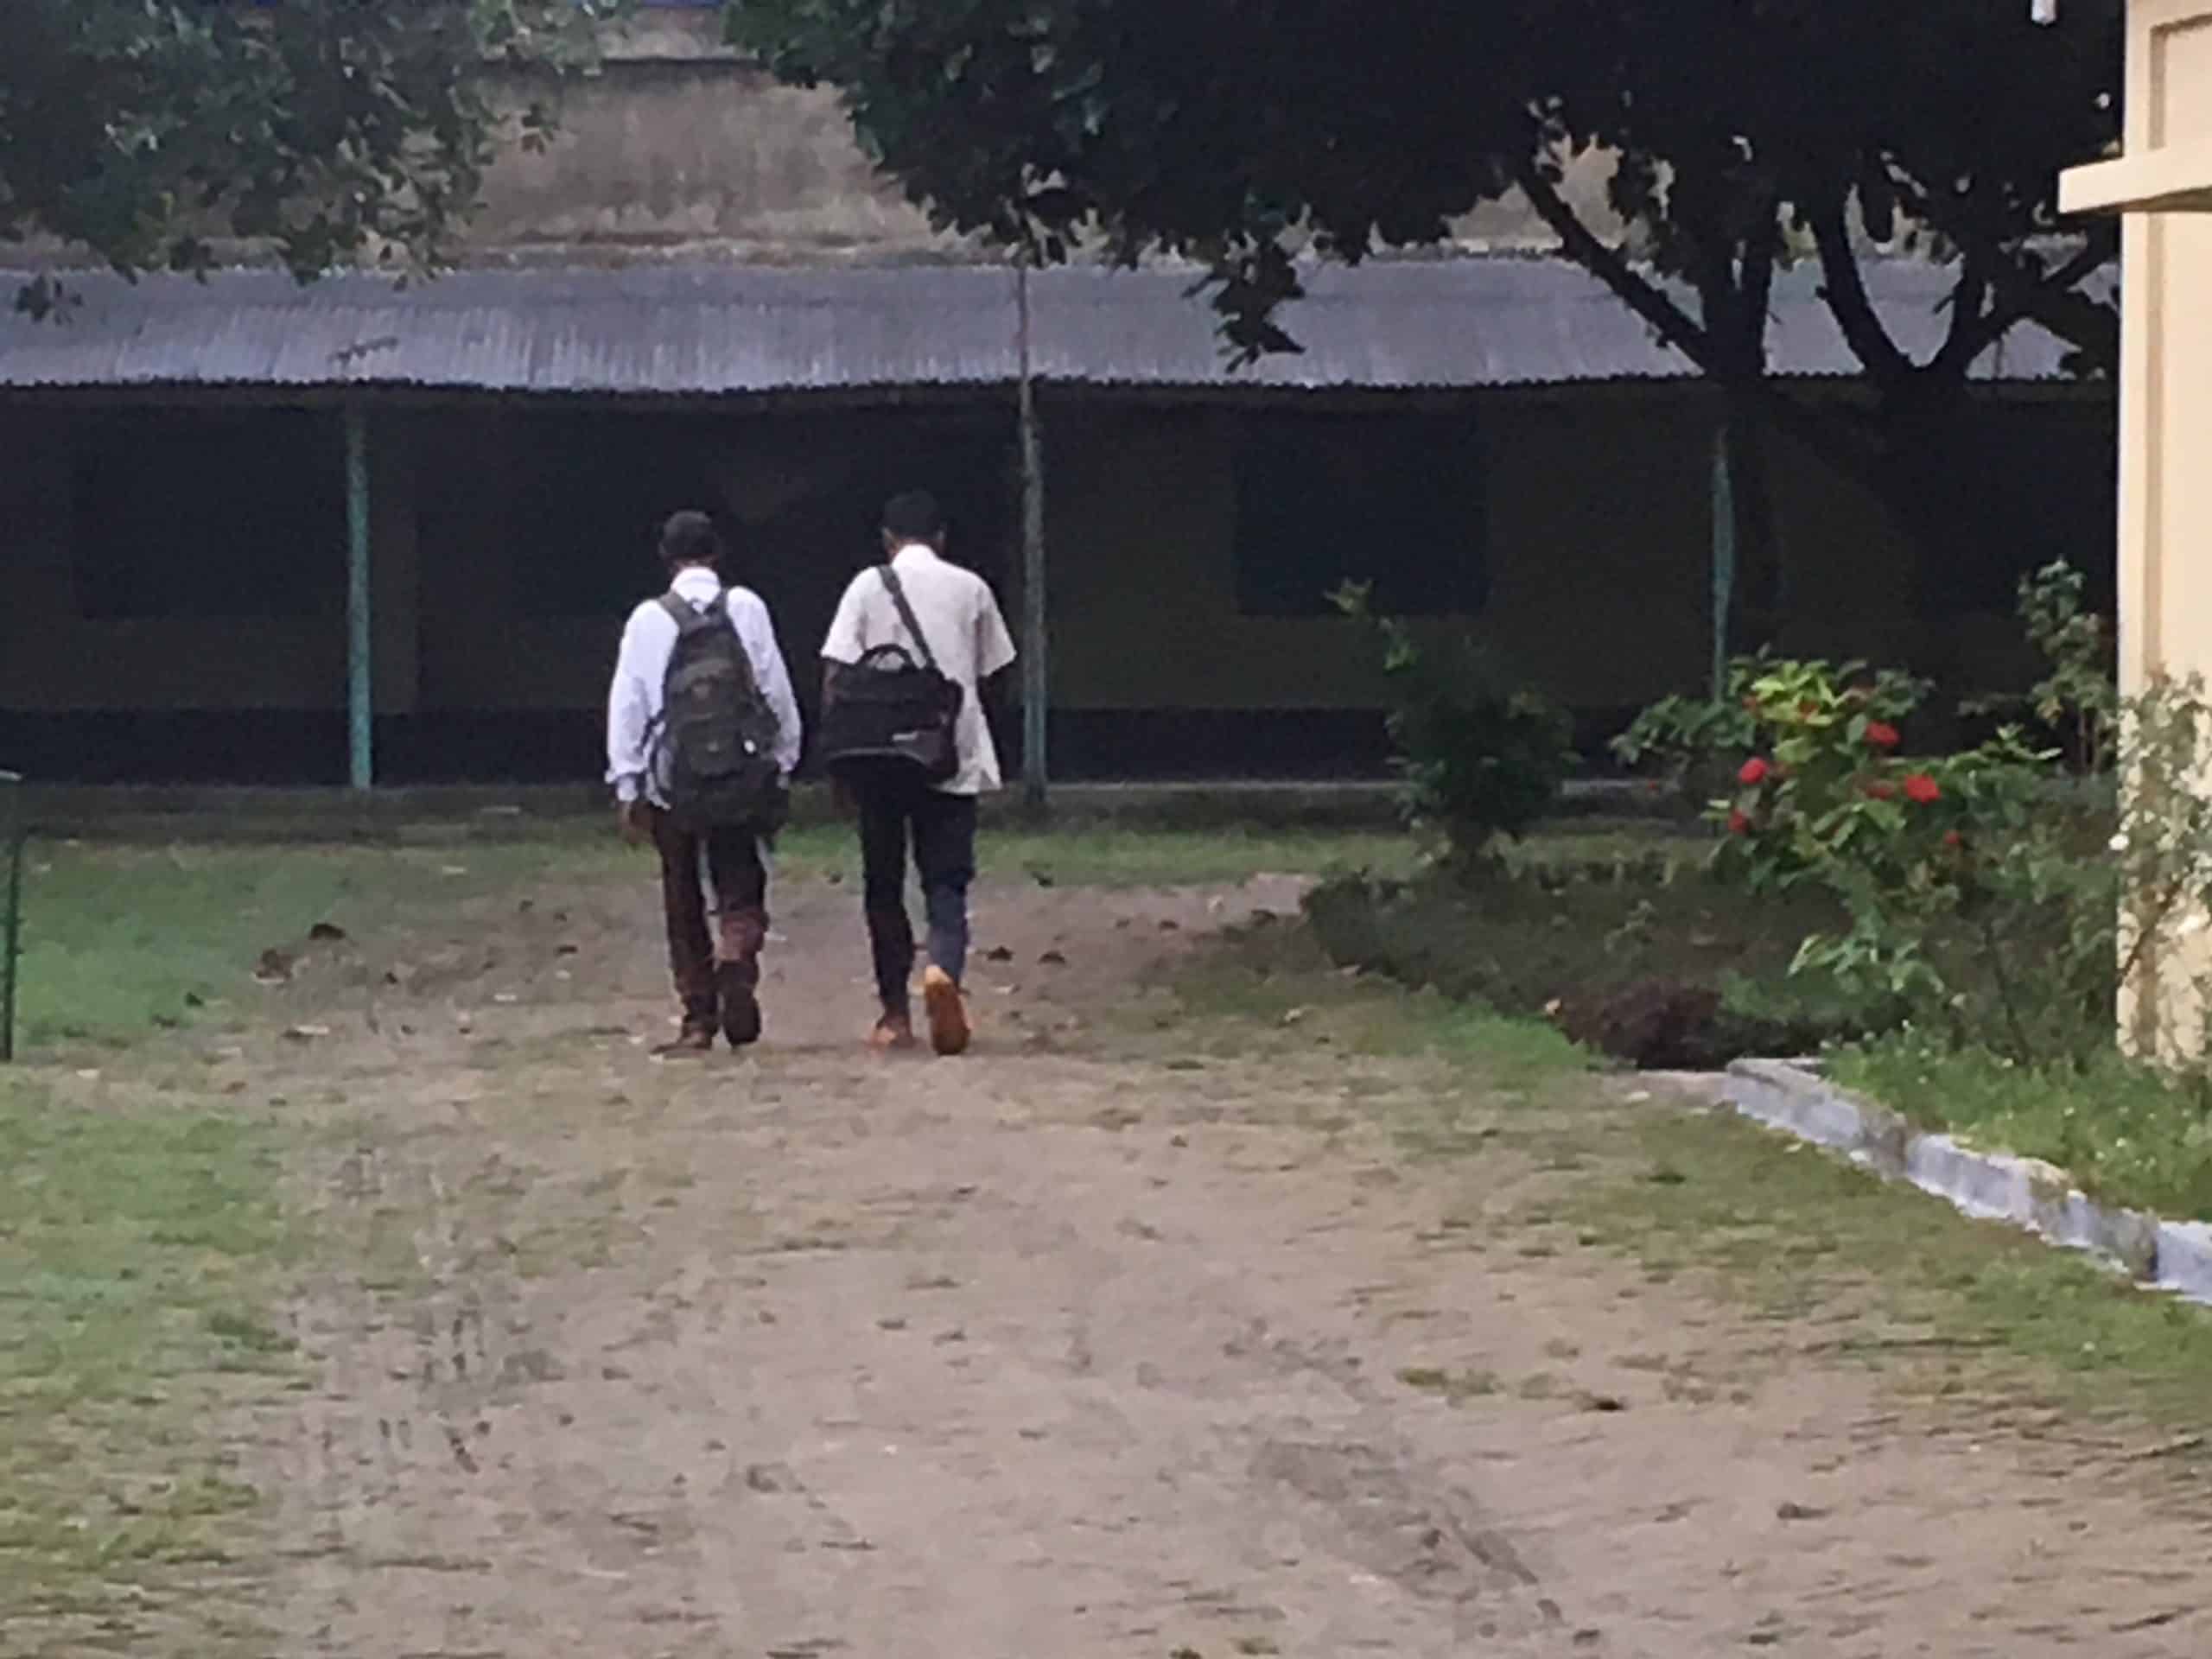 two men wearing backpacks walking to a building where Hands to the Plow training is